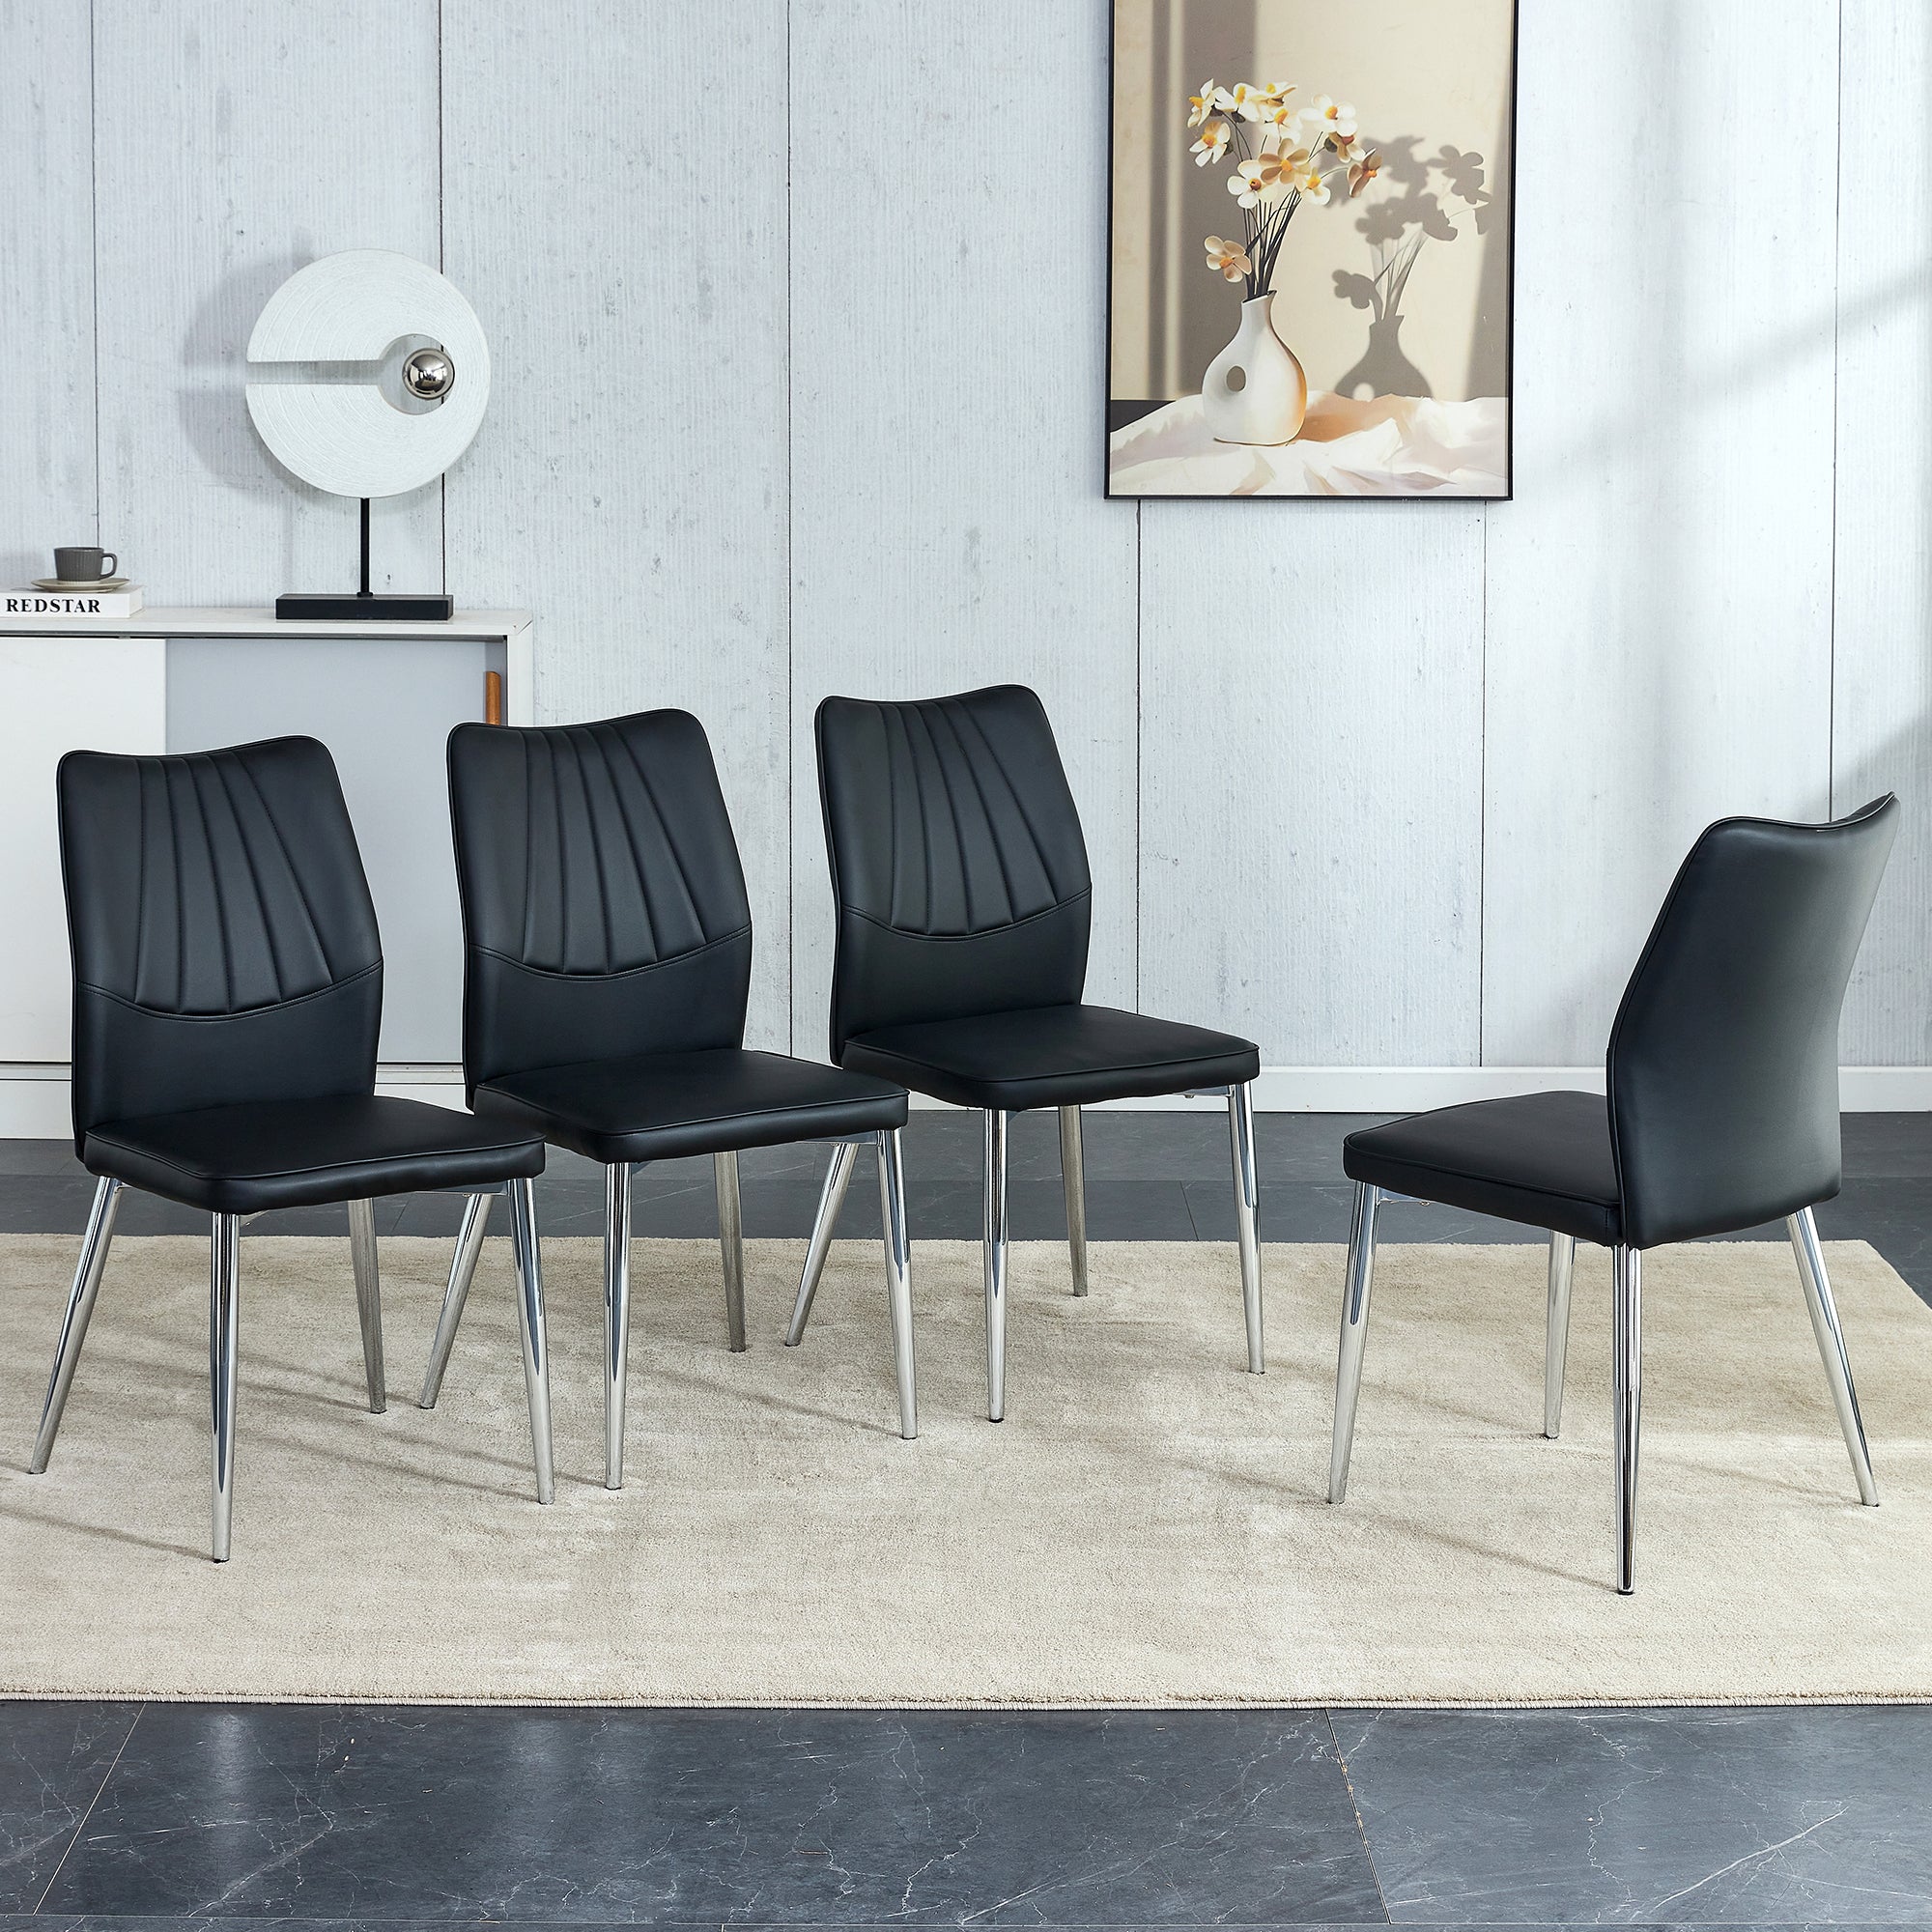 🆓🚛 6 Black Dining Chairs Modern Chairs From The Middle Ages Made of Pu Material Cushion & Silver Metal Legs Suitable for Restaurants & Living Rooms